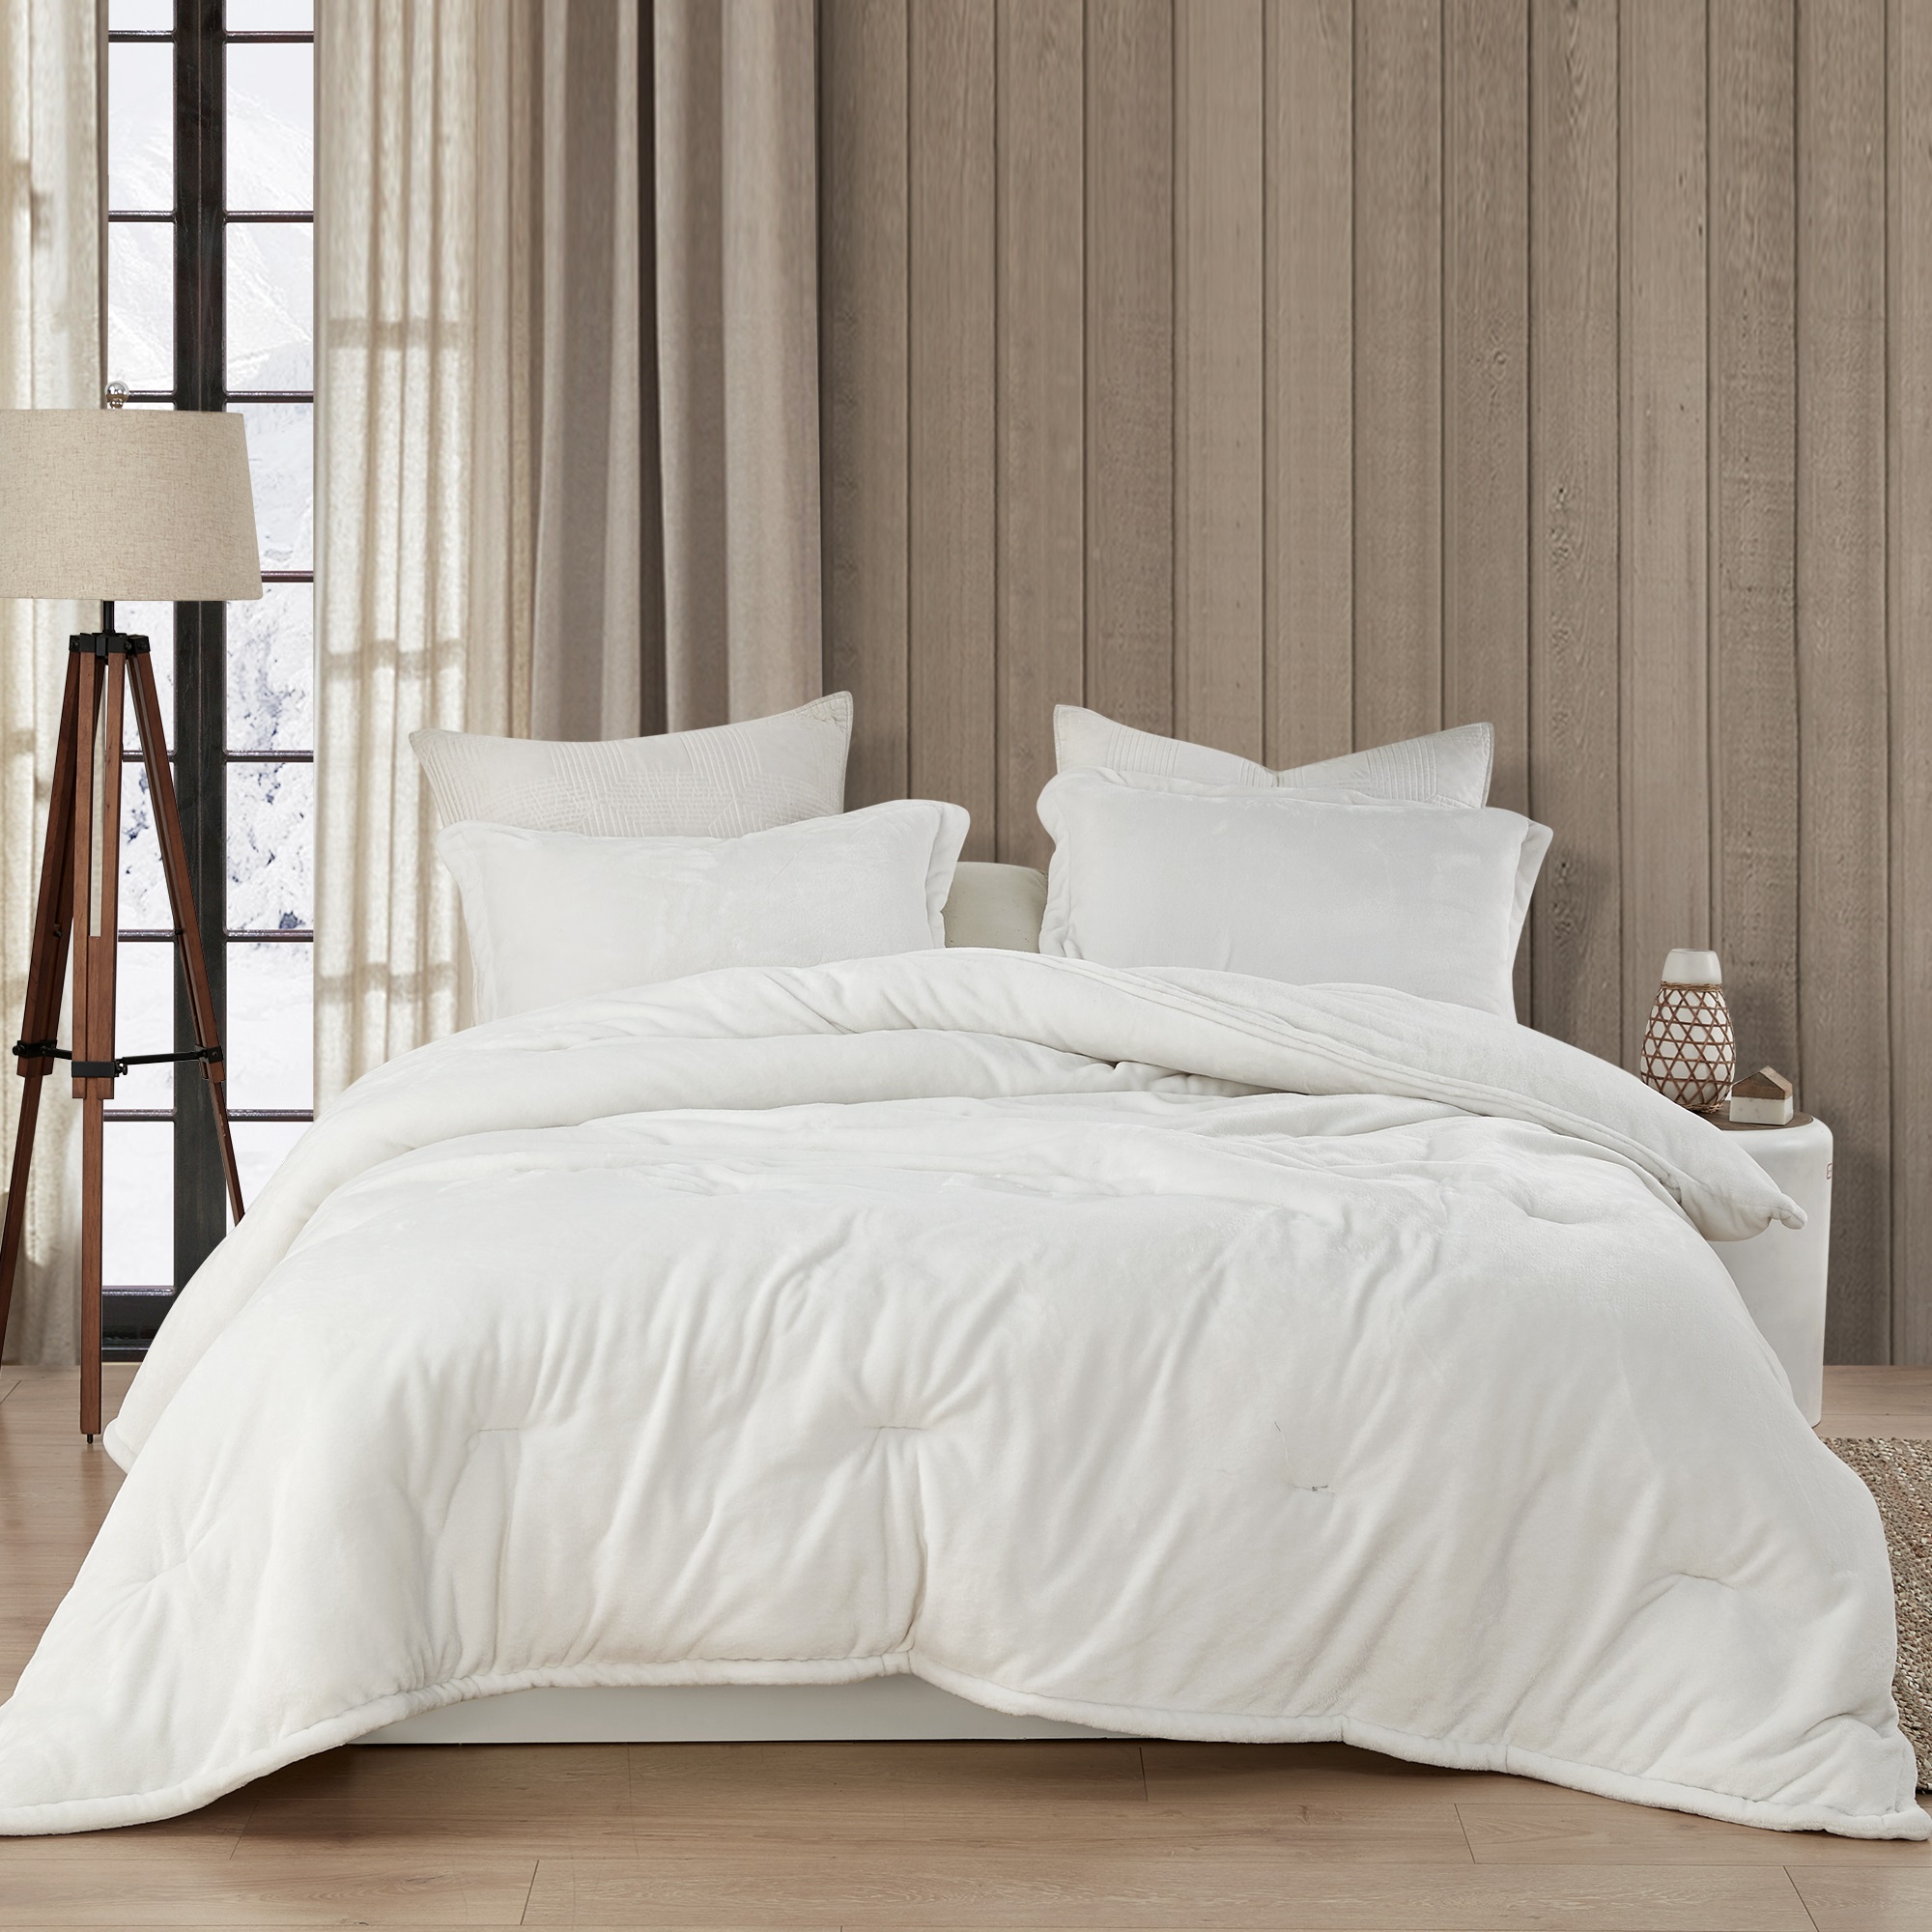 Coma Inducer® Oversized Comforter - Wait Oh What - Farmhouse White